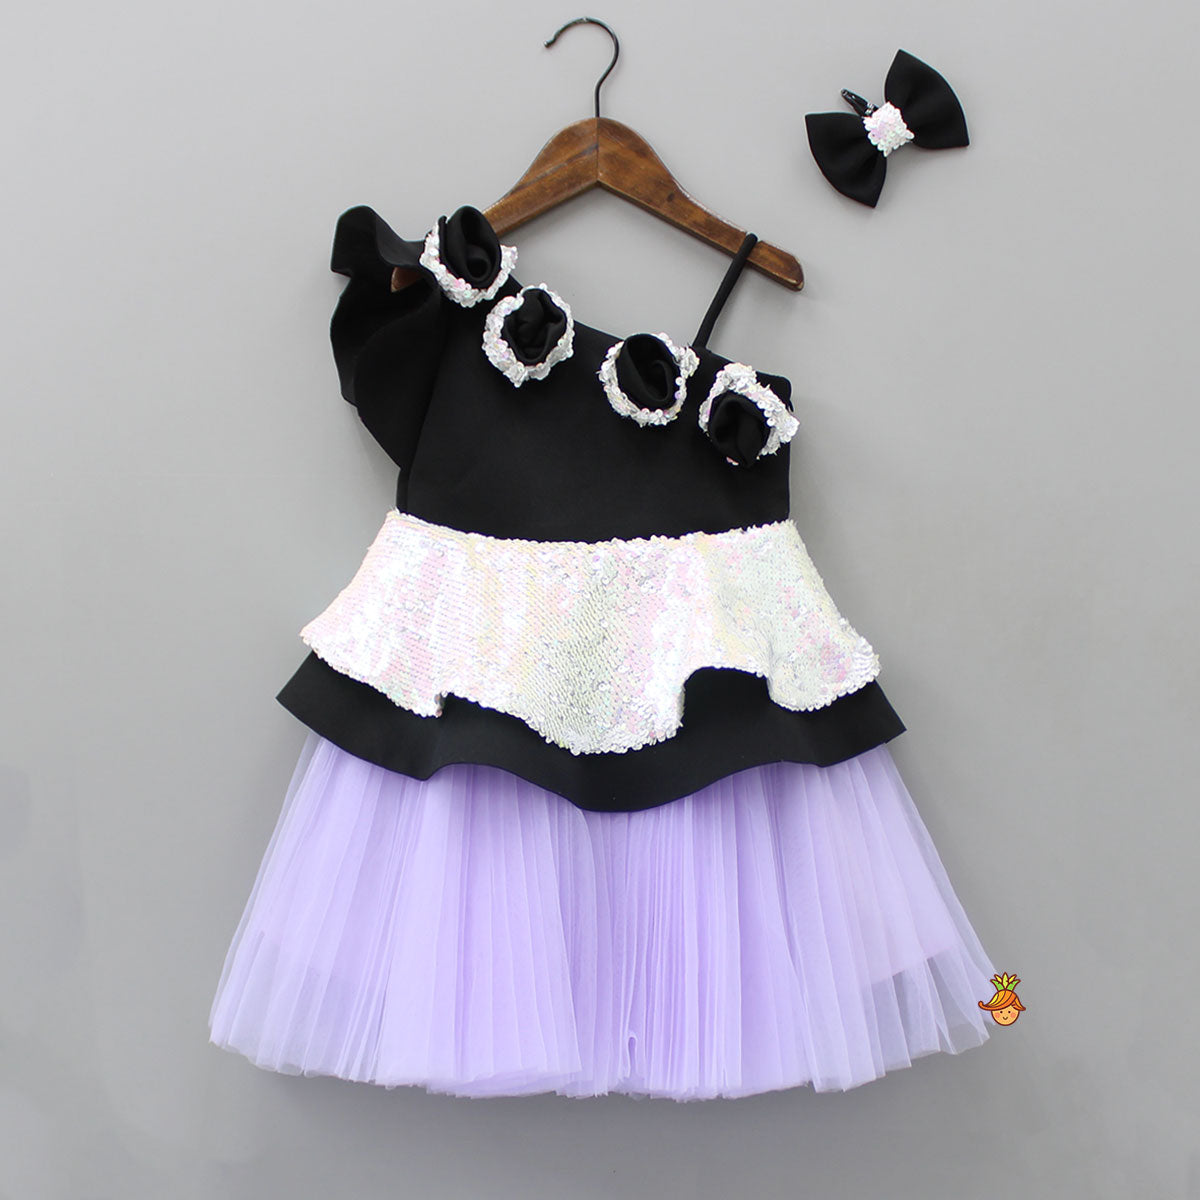 Pre Order: Sequins Embellished Peplum Dress With Net Bottom And Matching Bowie Hair Clip